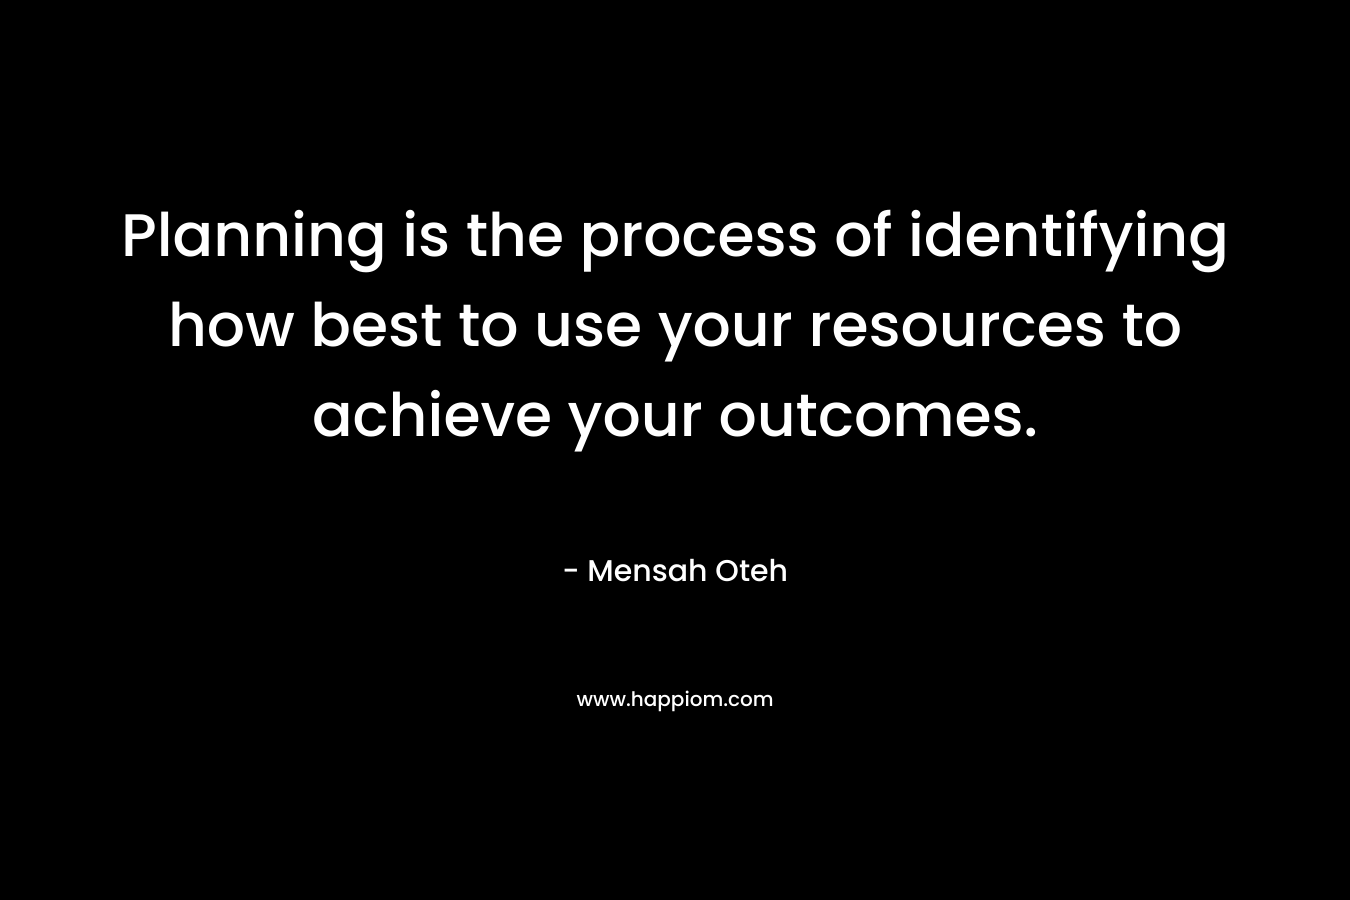 Planning is the process of identifying how best to use your resources to achieve your outcomes.